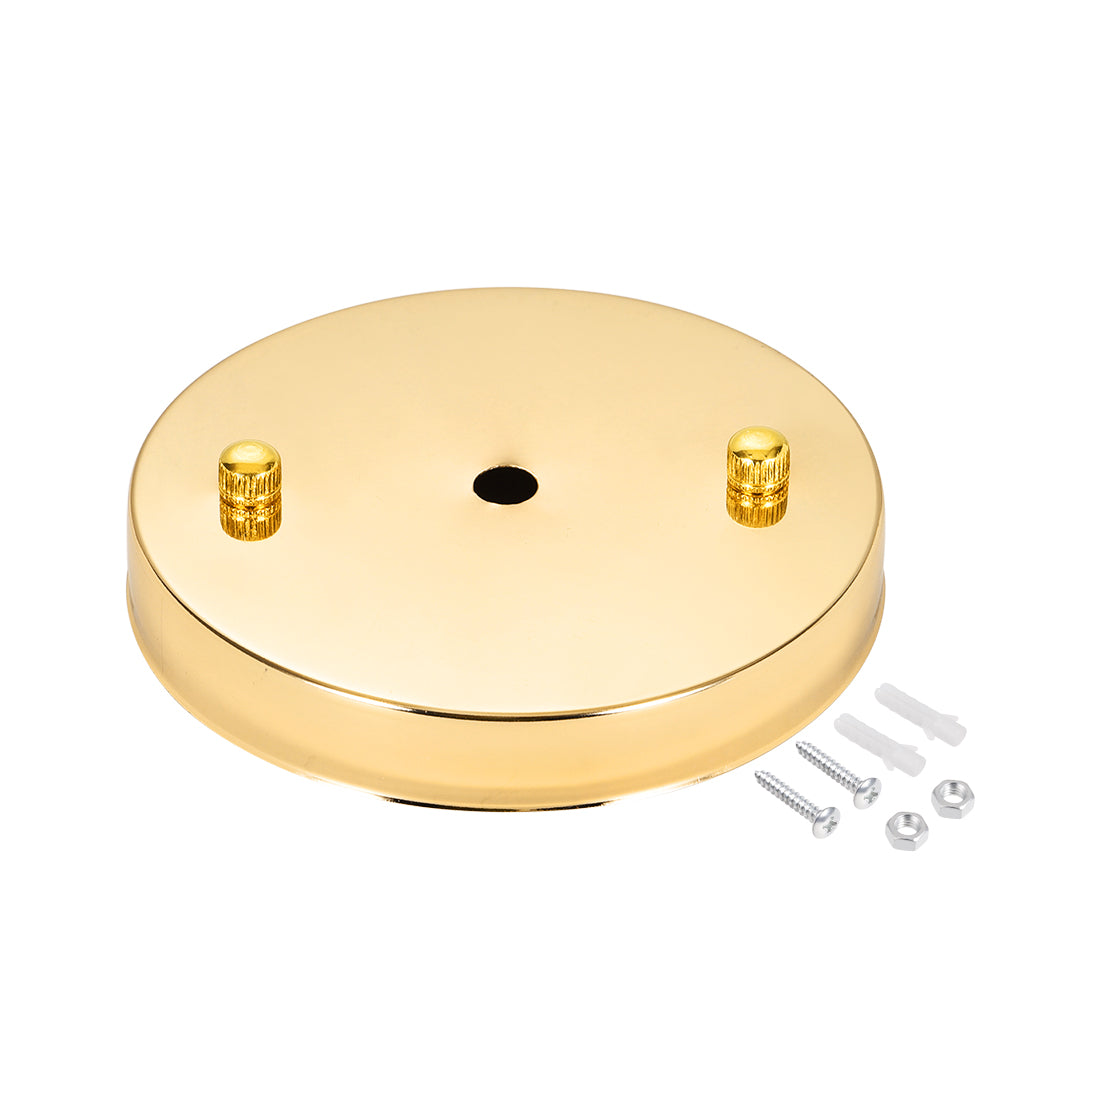 Uxcell Uxcell Retro Light Canopy Kit Pendant Lighting Ceiling Plate 120mm 4.7Inch Gold Bronze